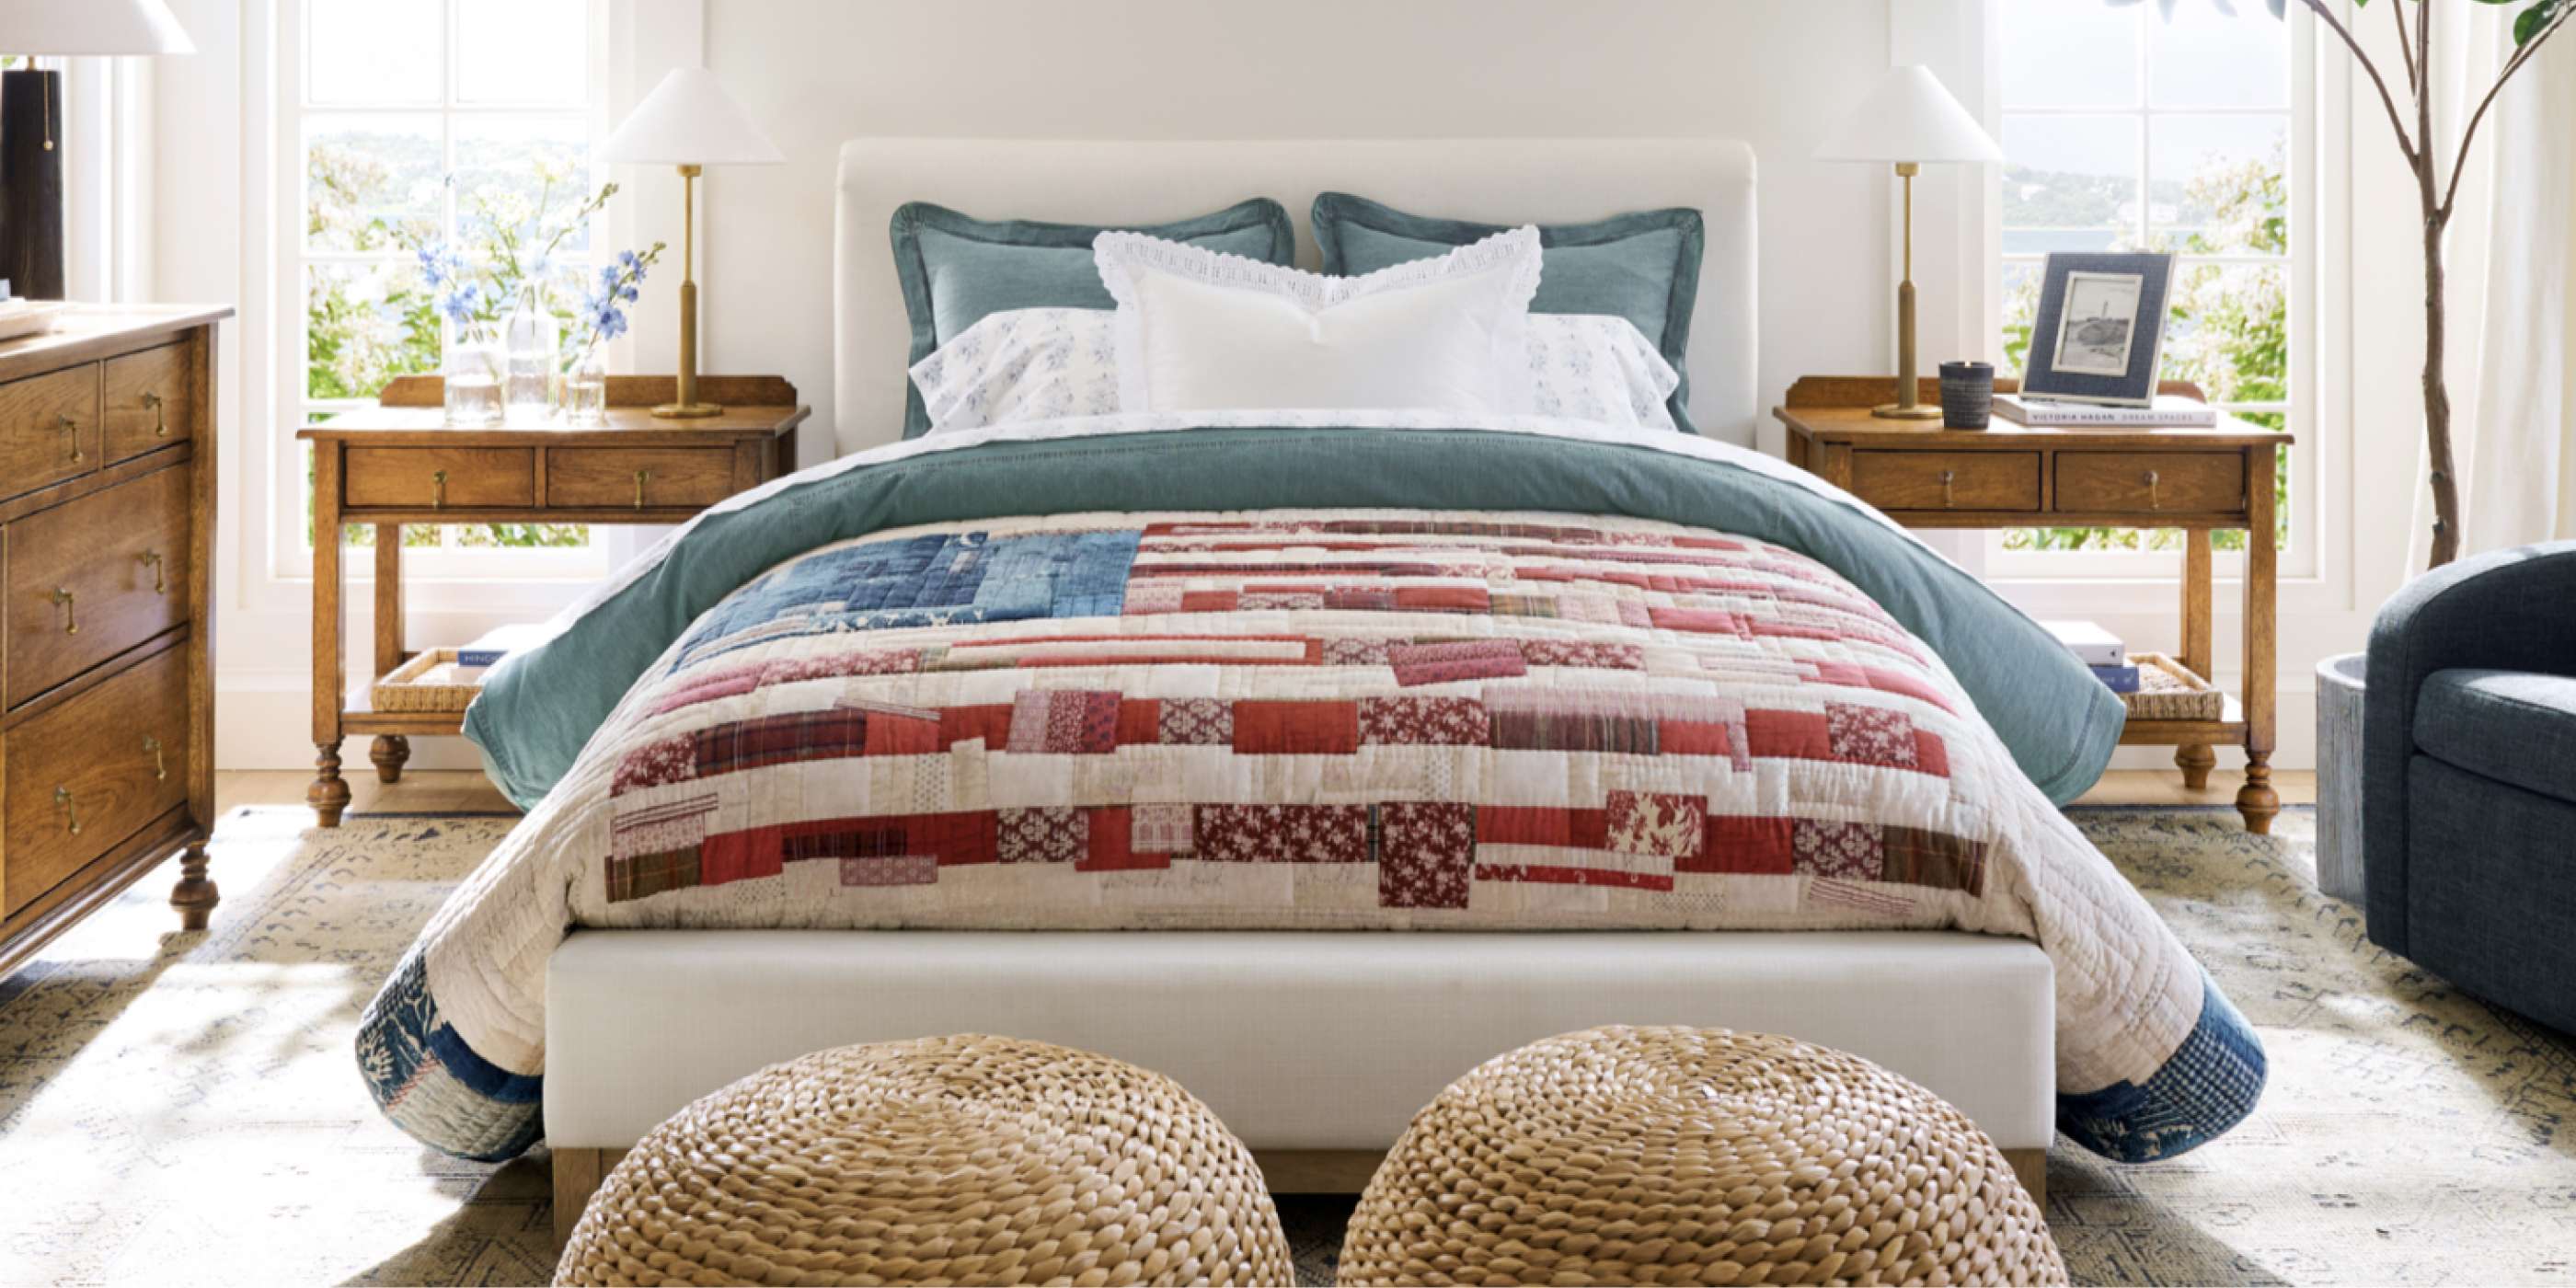 Our Favorite Bedding Looks